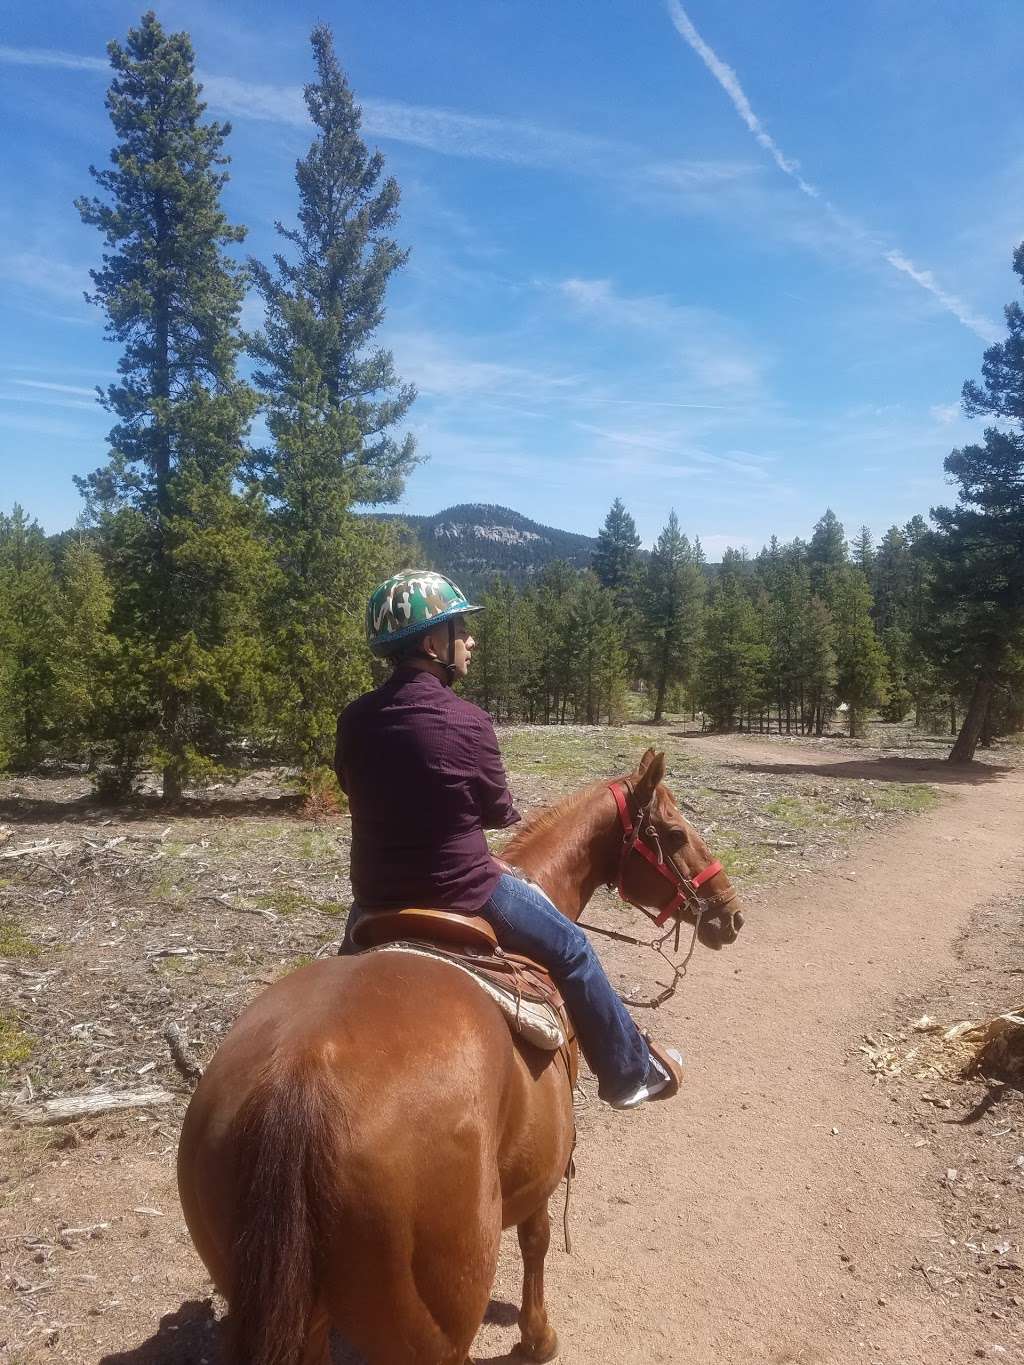 Bear Mountain Stables | 11778 Wonder Dr, Conifer, CO 80433, USA | Phone: (303) 588-2551